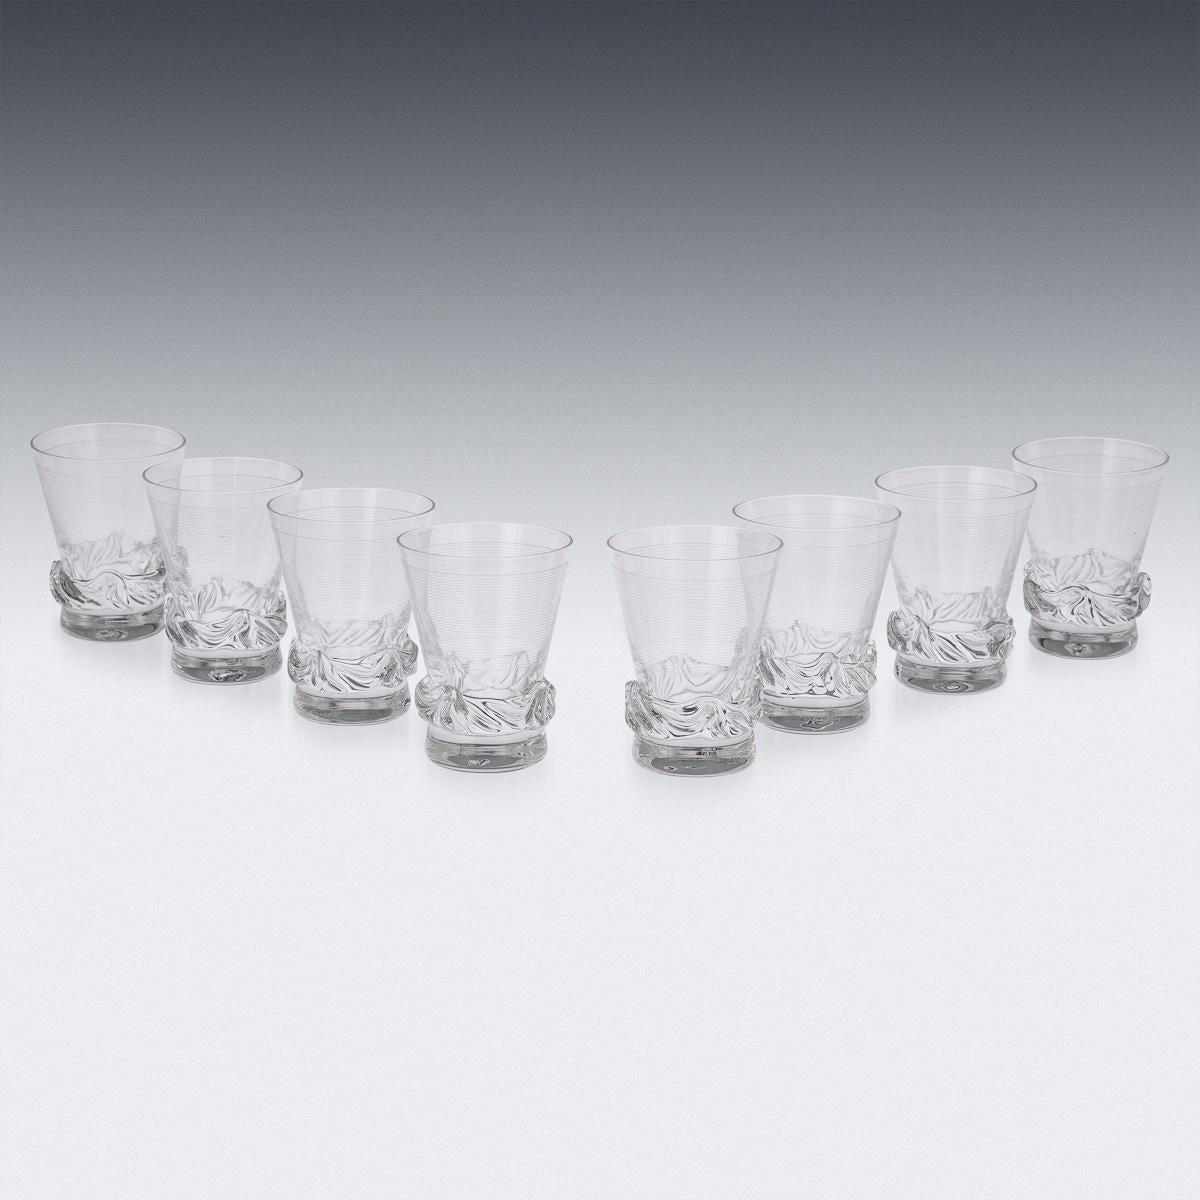 A set of eight sculptural crystal tumblers. Made around the middle of the 20th century, this refined translucent glass pattern was realised by the fabled French design house Daum. With its timeless form and clean modernist lines, these items are as